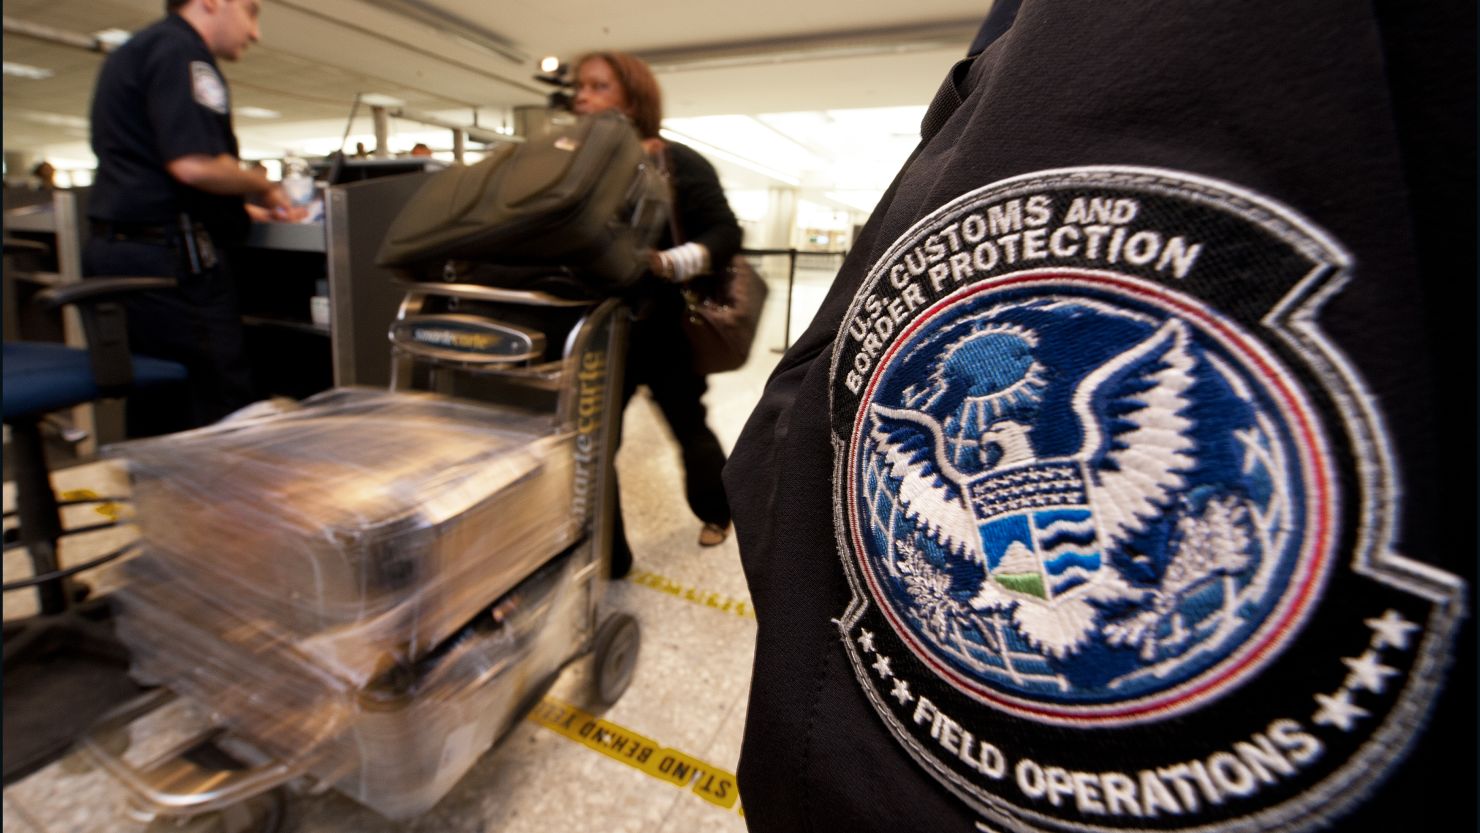 Customs and Border Protection said all airports were back online after the outage lasted from 7:30 p.m. to about 9:30 p.m. ET on Monday.